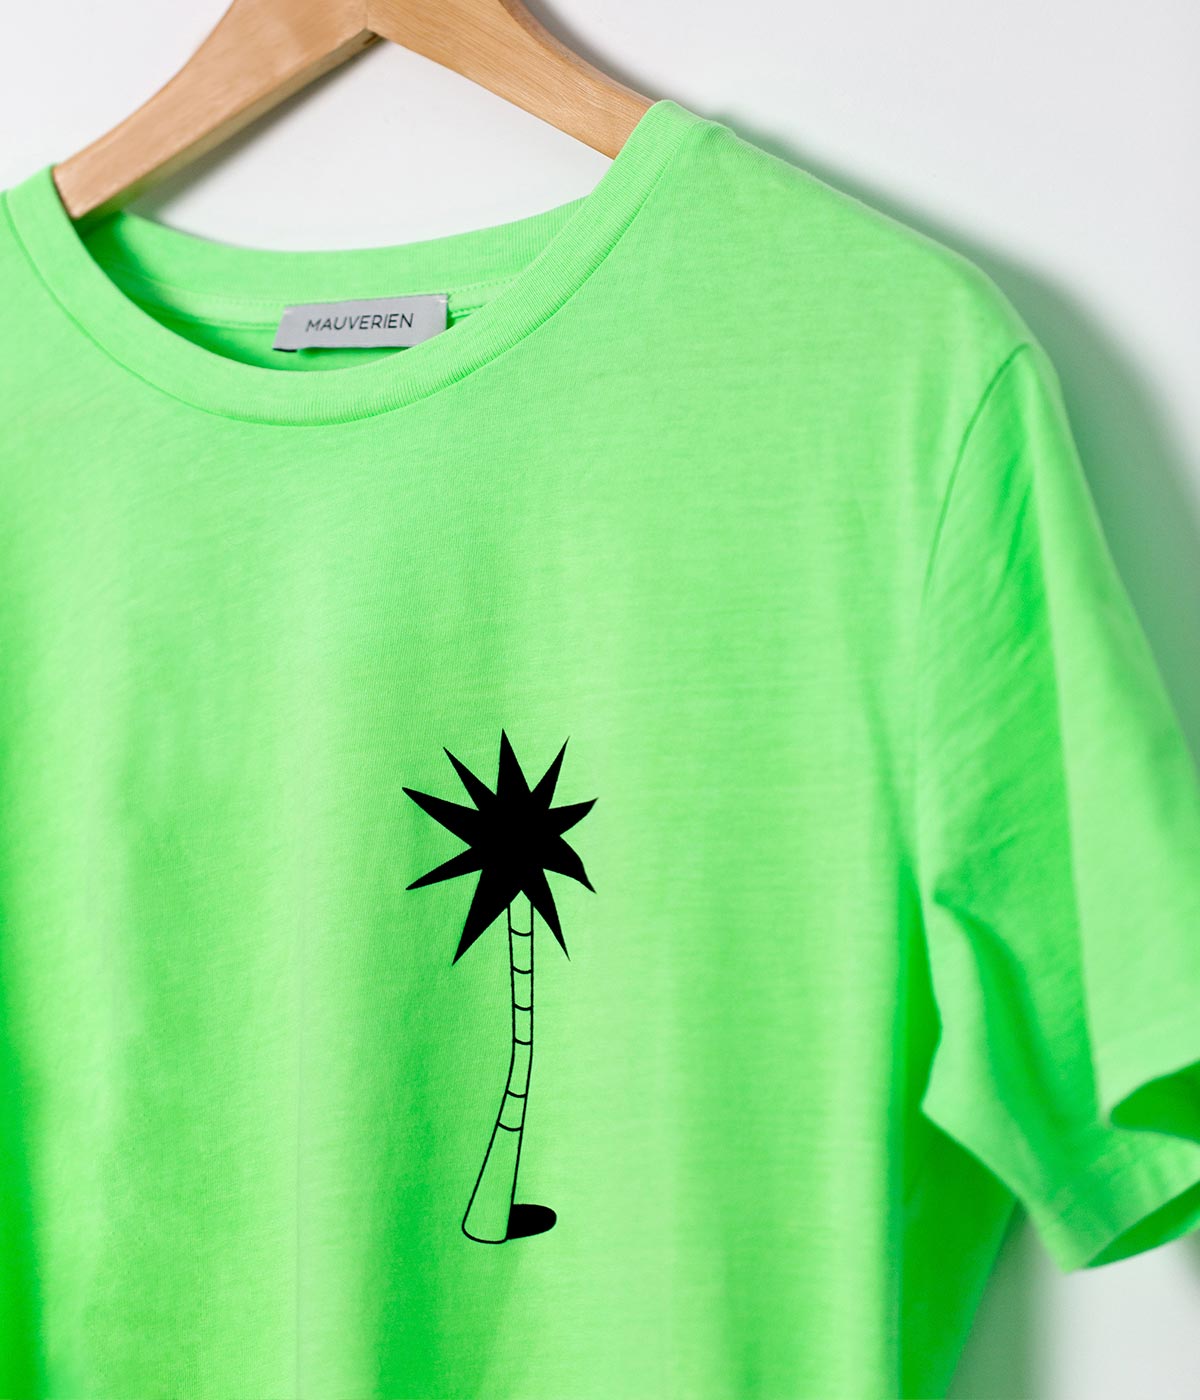 Close-up of neon green t-shirt with black palm tree print by Romanian designer Mauverien.